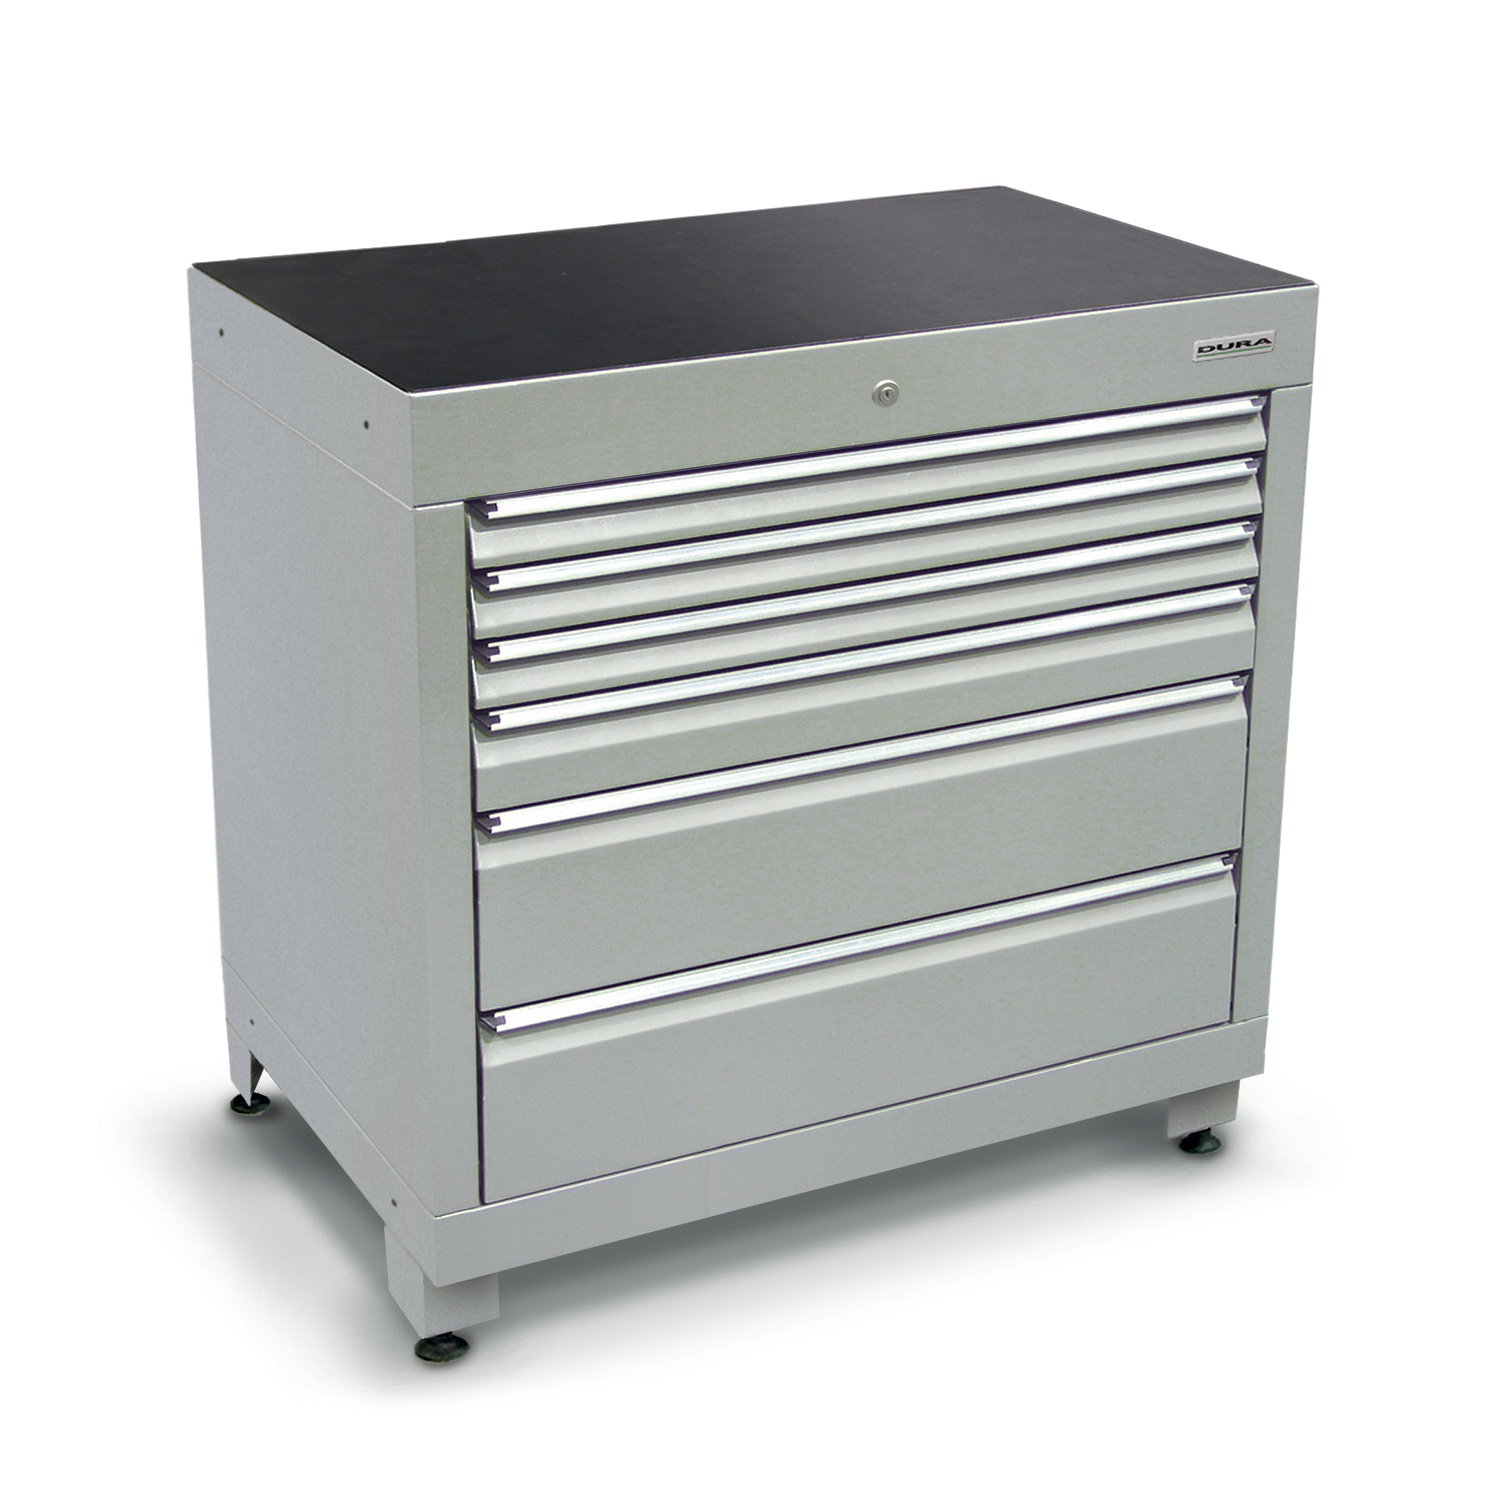 900 series cabinet with 6 drawers (3 slim, 1 medium, 2 large) and feet